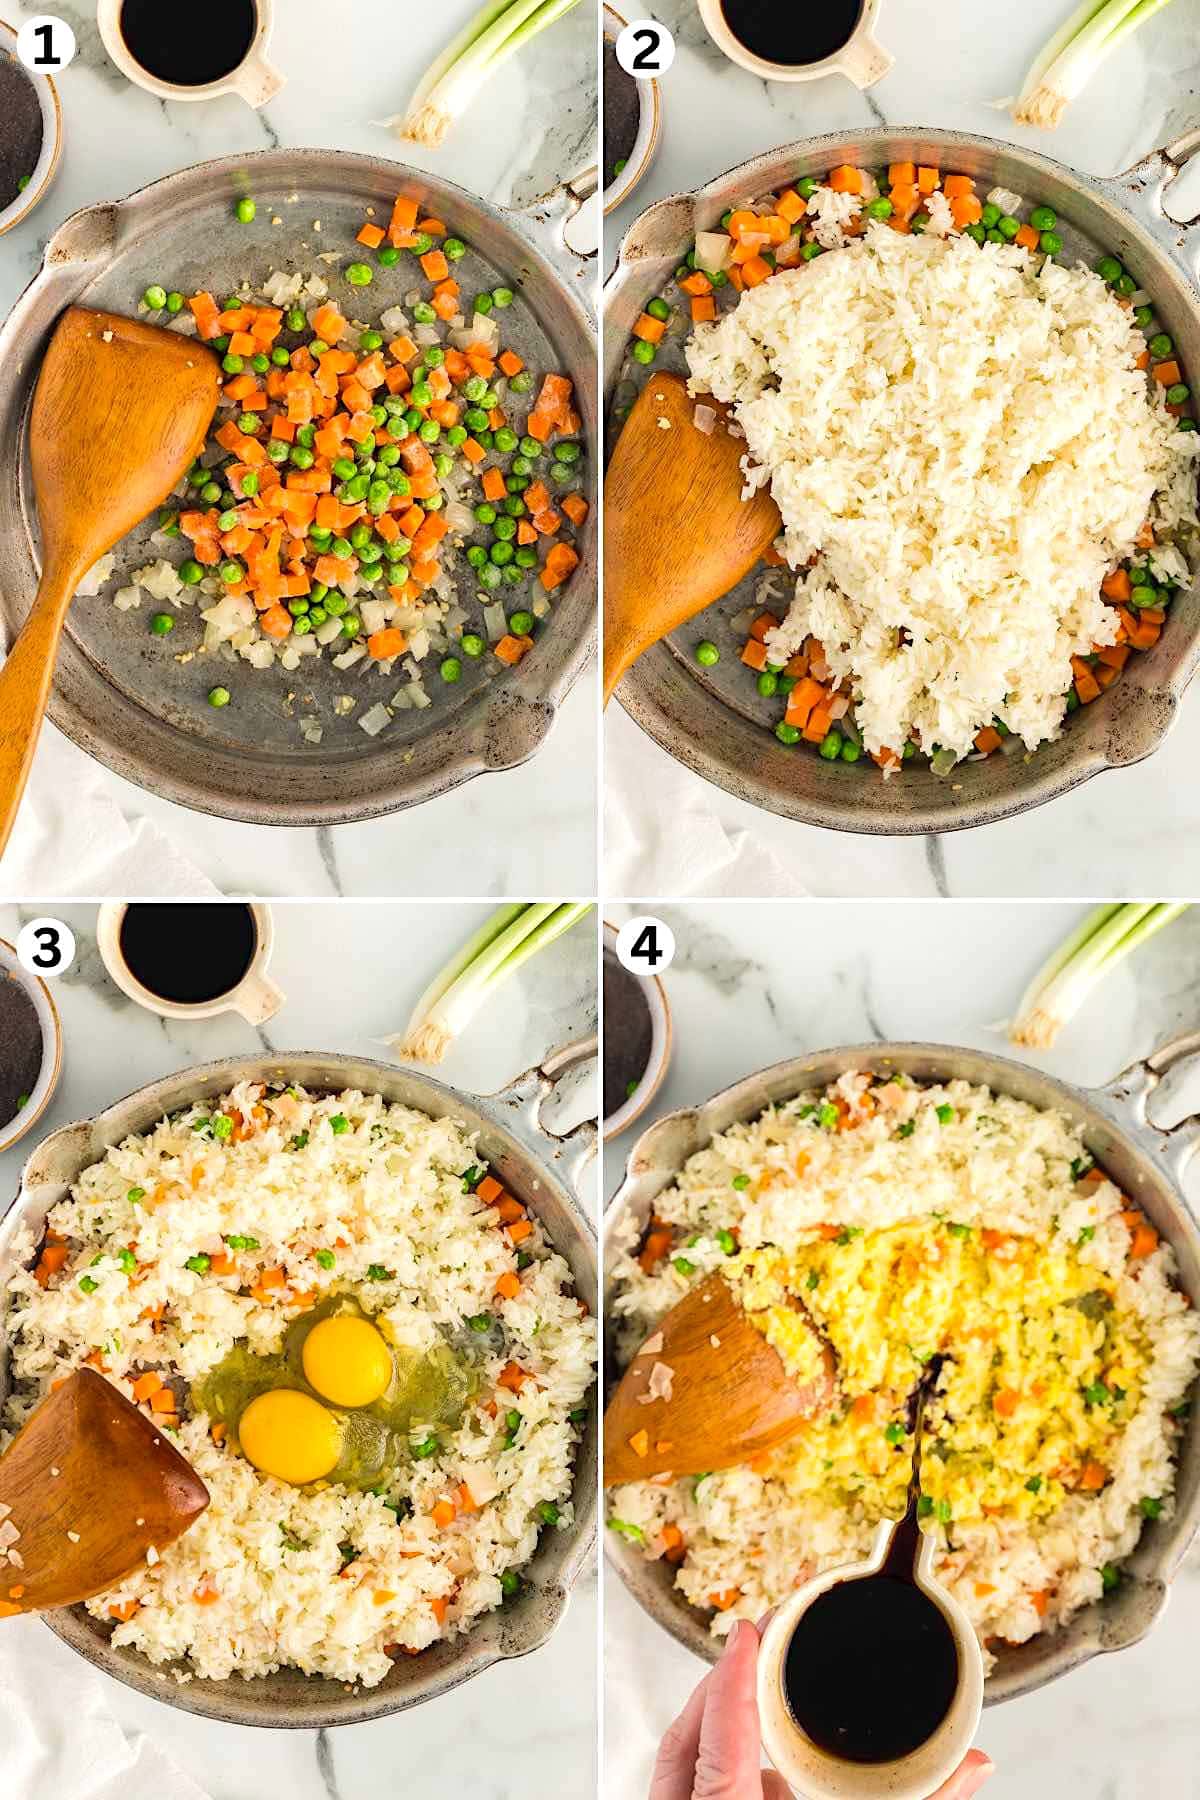 A four-step cooking sequence: 1) chopped vegetables in a pan, 2) adding rice to the vegetables, 3) rice mixed with vegetables and cracking an egg, 4) pouring